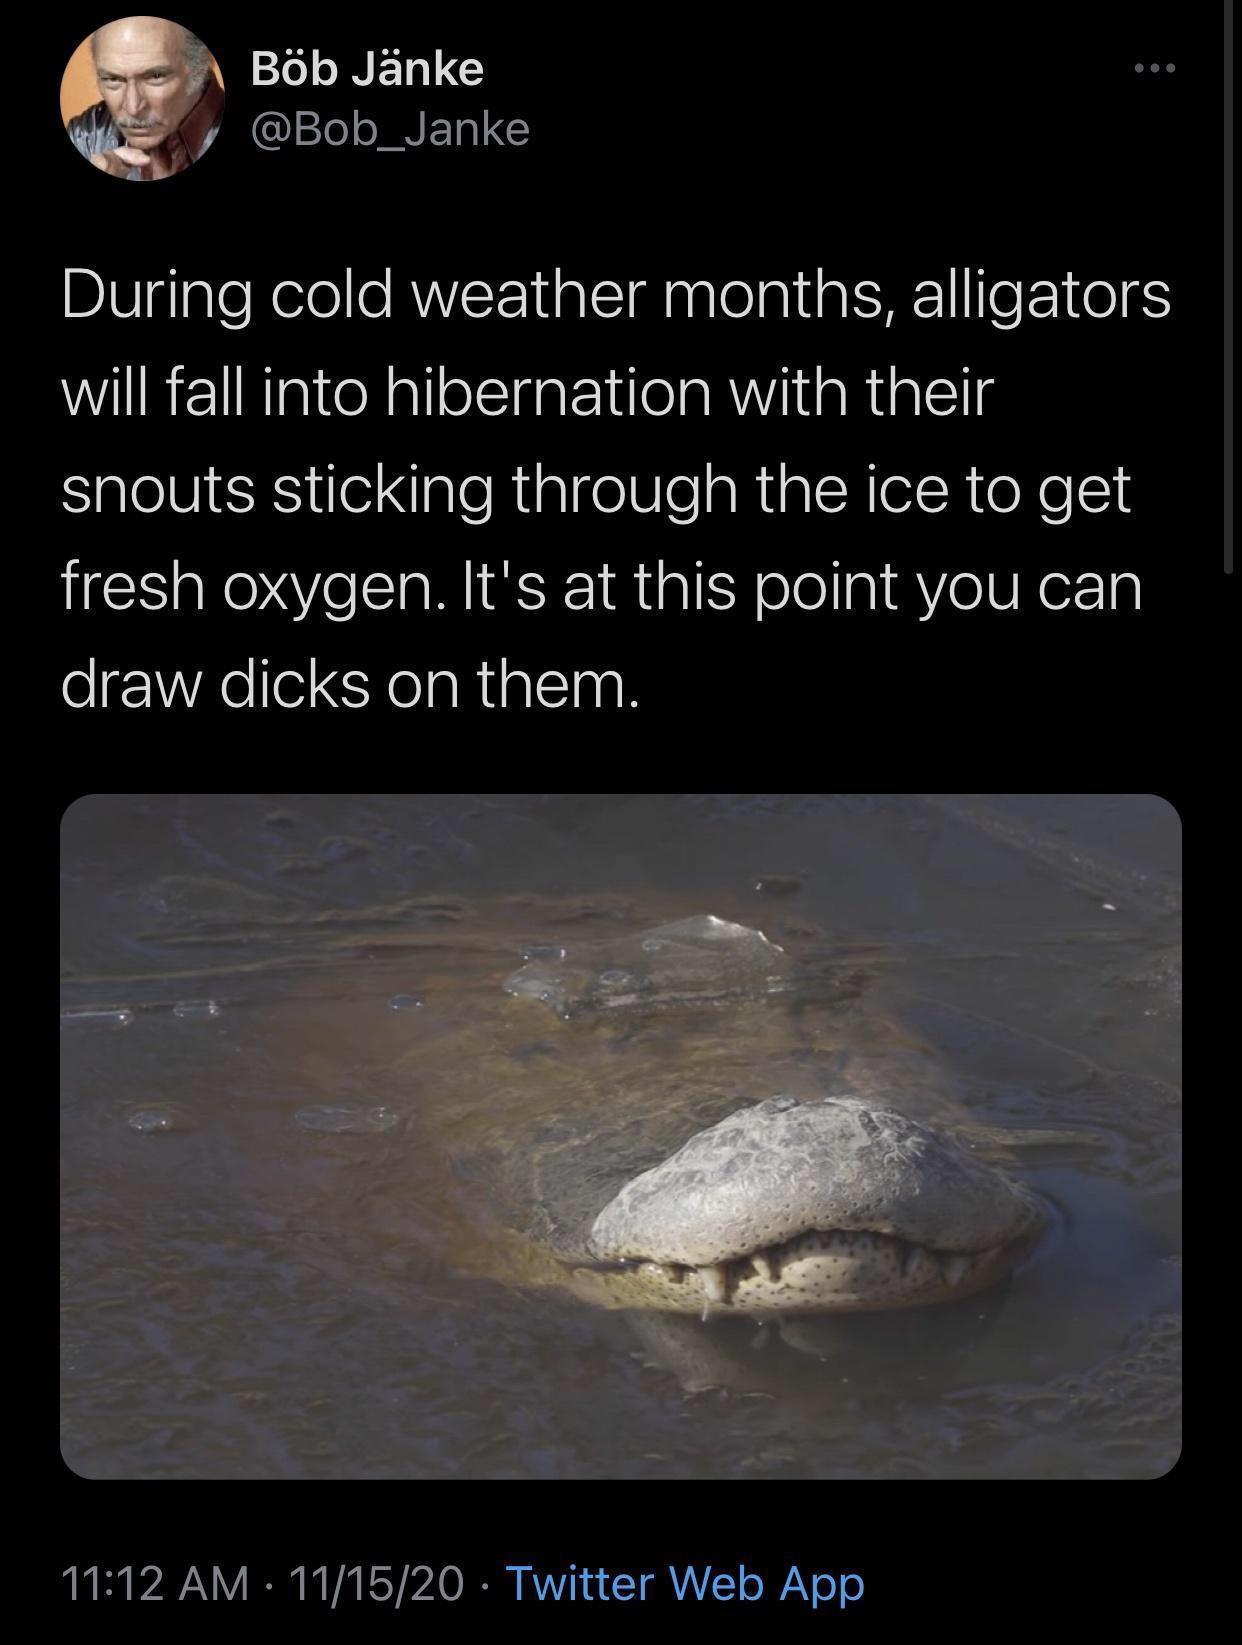 funny pics and memes - Meme - Bb Jnke During cold weather months, alligators will fall into hibernation with their snouts sticking through the ice to get fresh oxygen. It's at this point you can draw dicks on them. 111520 Twitter Web App